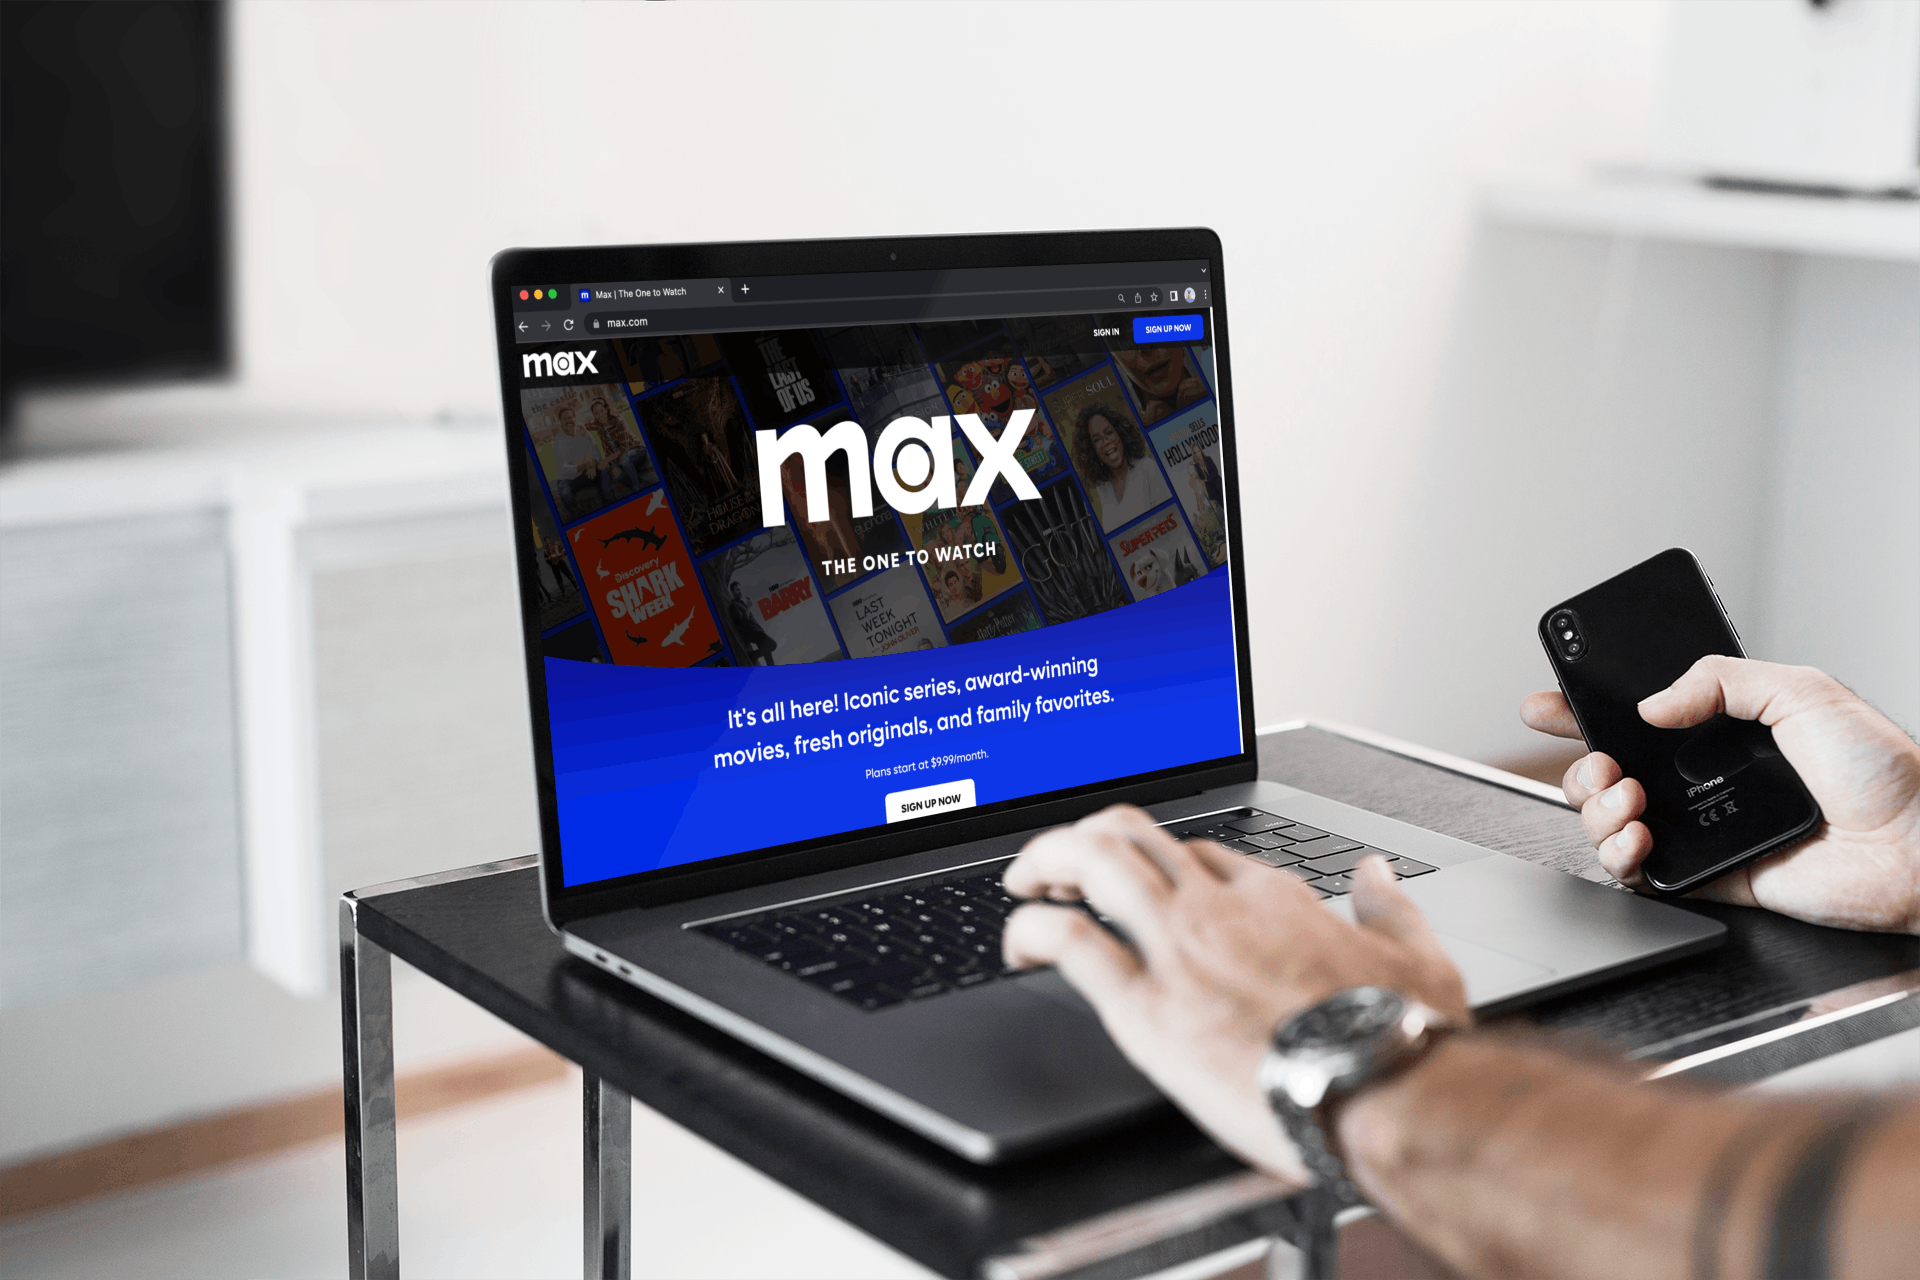 A person setting up Max streaming service on their laptop